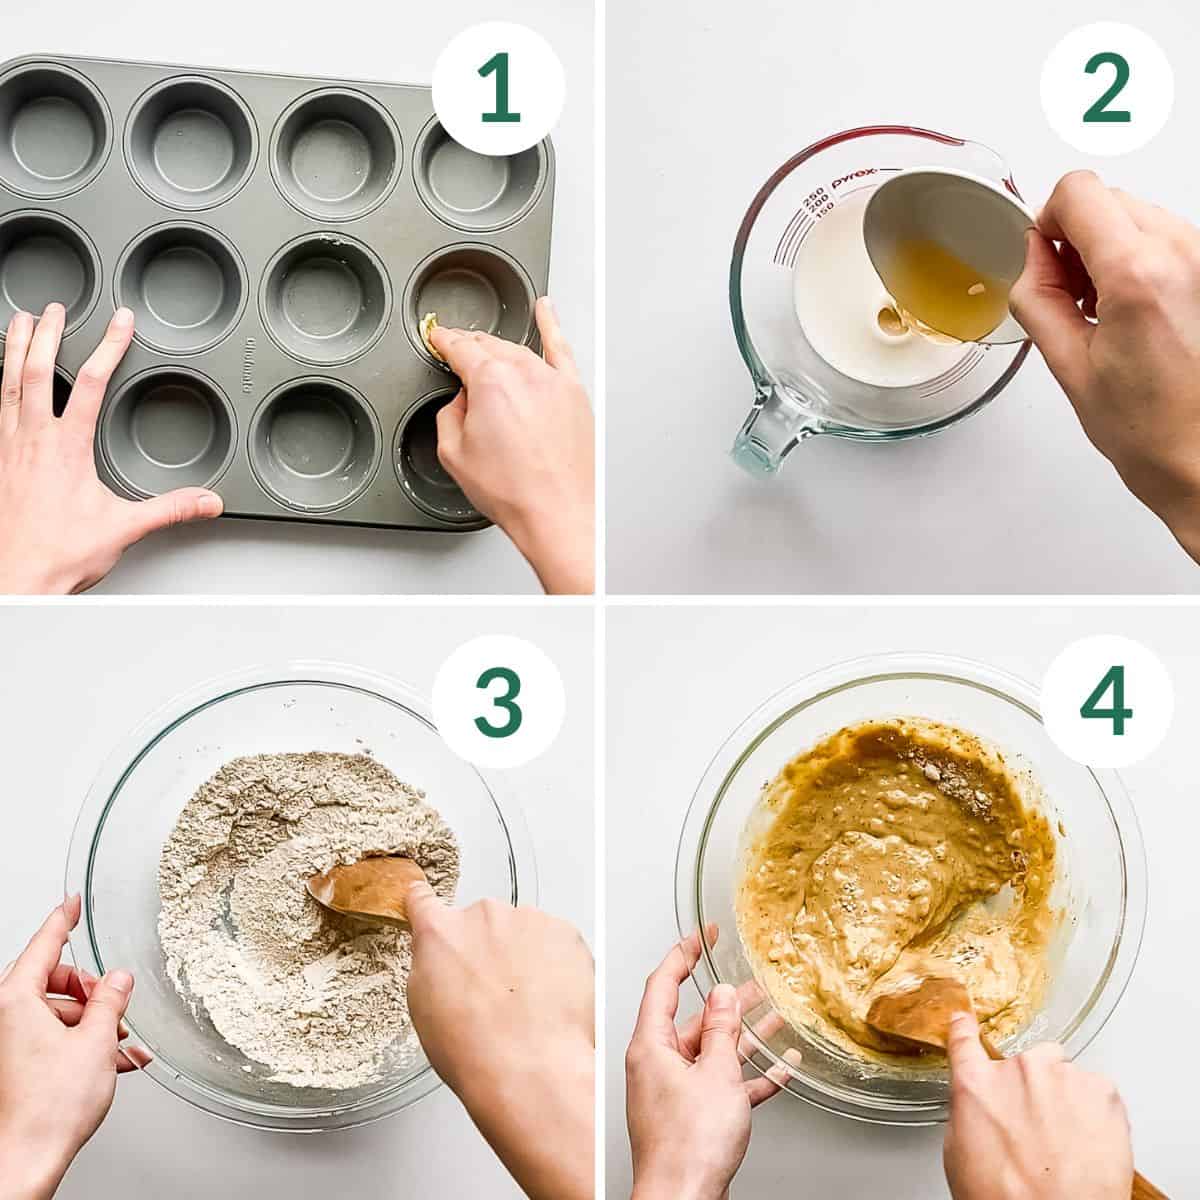 The first four steps of making muffins including greasing the muffin pan, mixing milk with vinegar, mixing dry ingredients, and adding the wet ingredients.